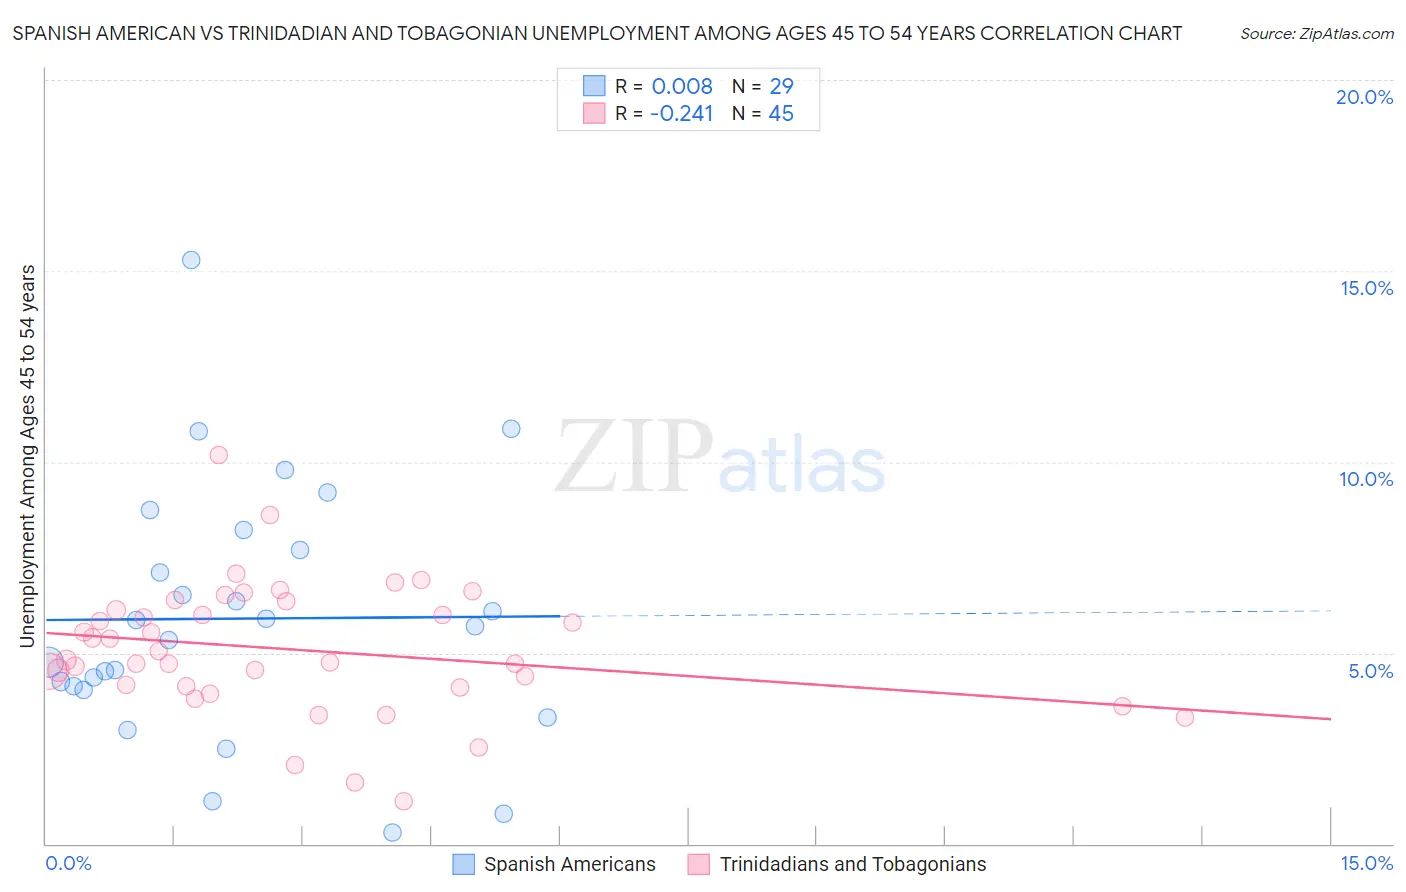 Spanish American vs Trinidadian and Tobagonian Unemployment Among Ages 45 to 54 years